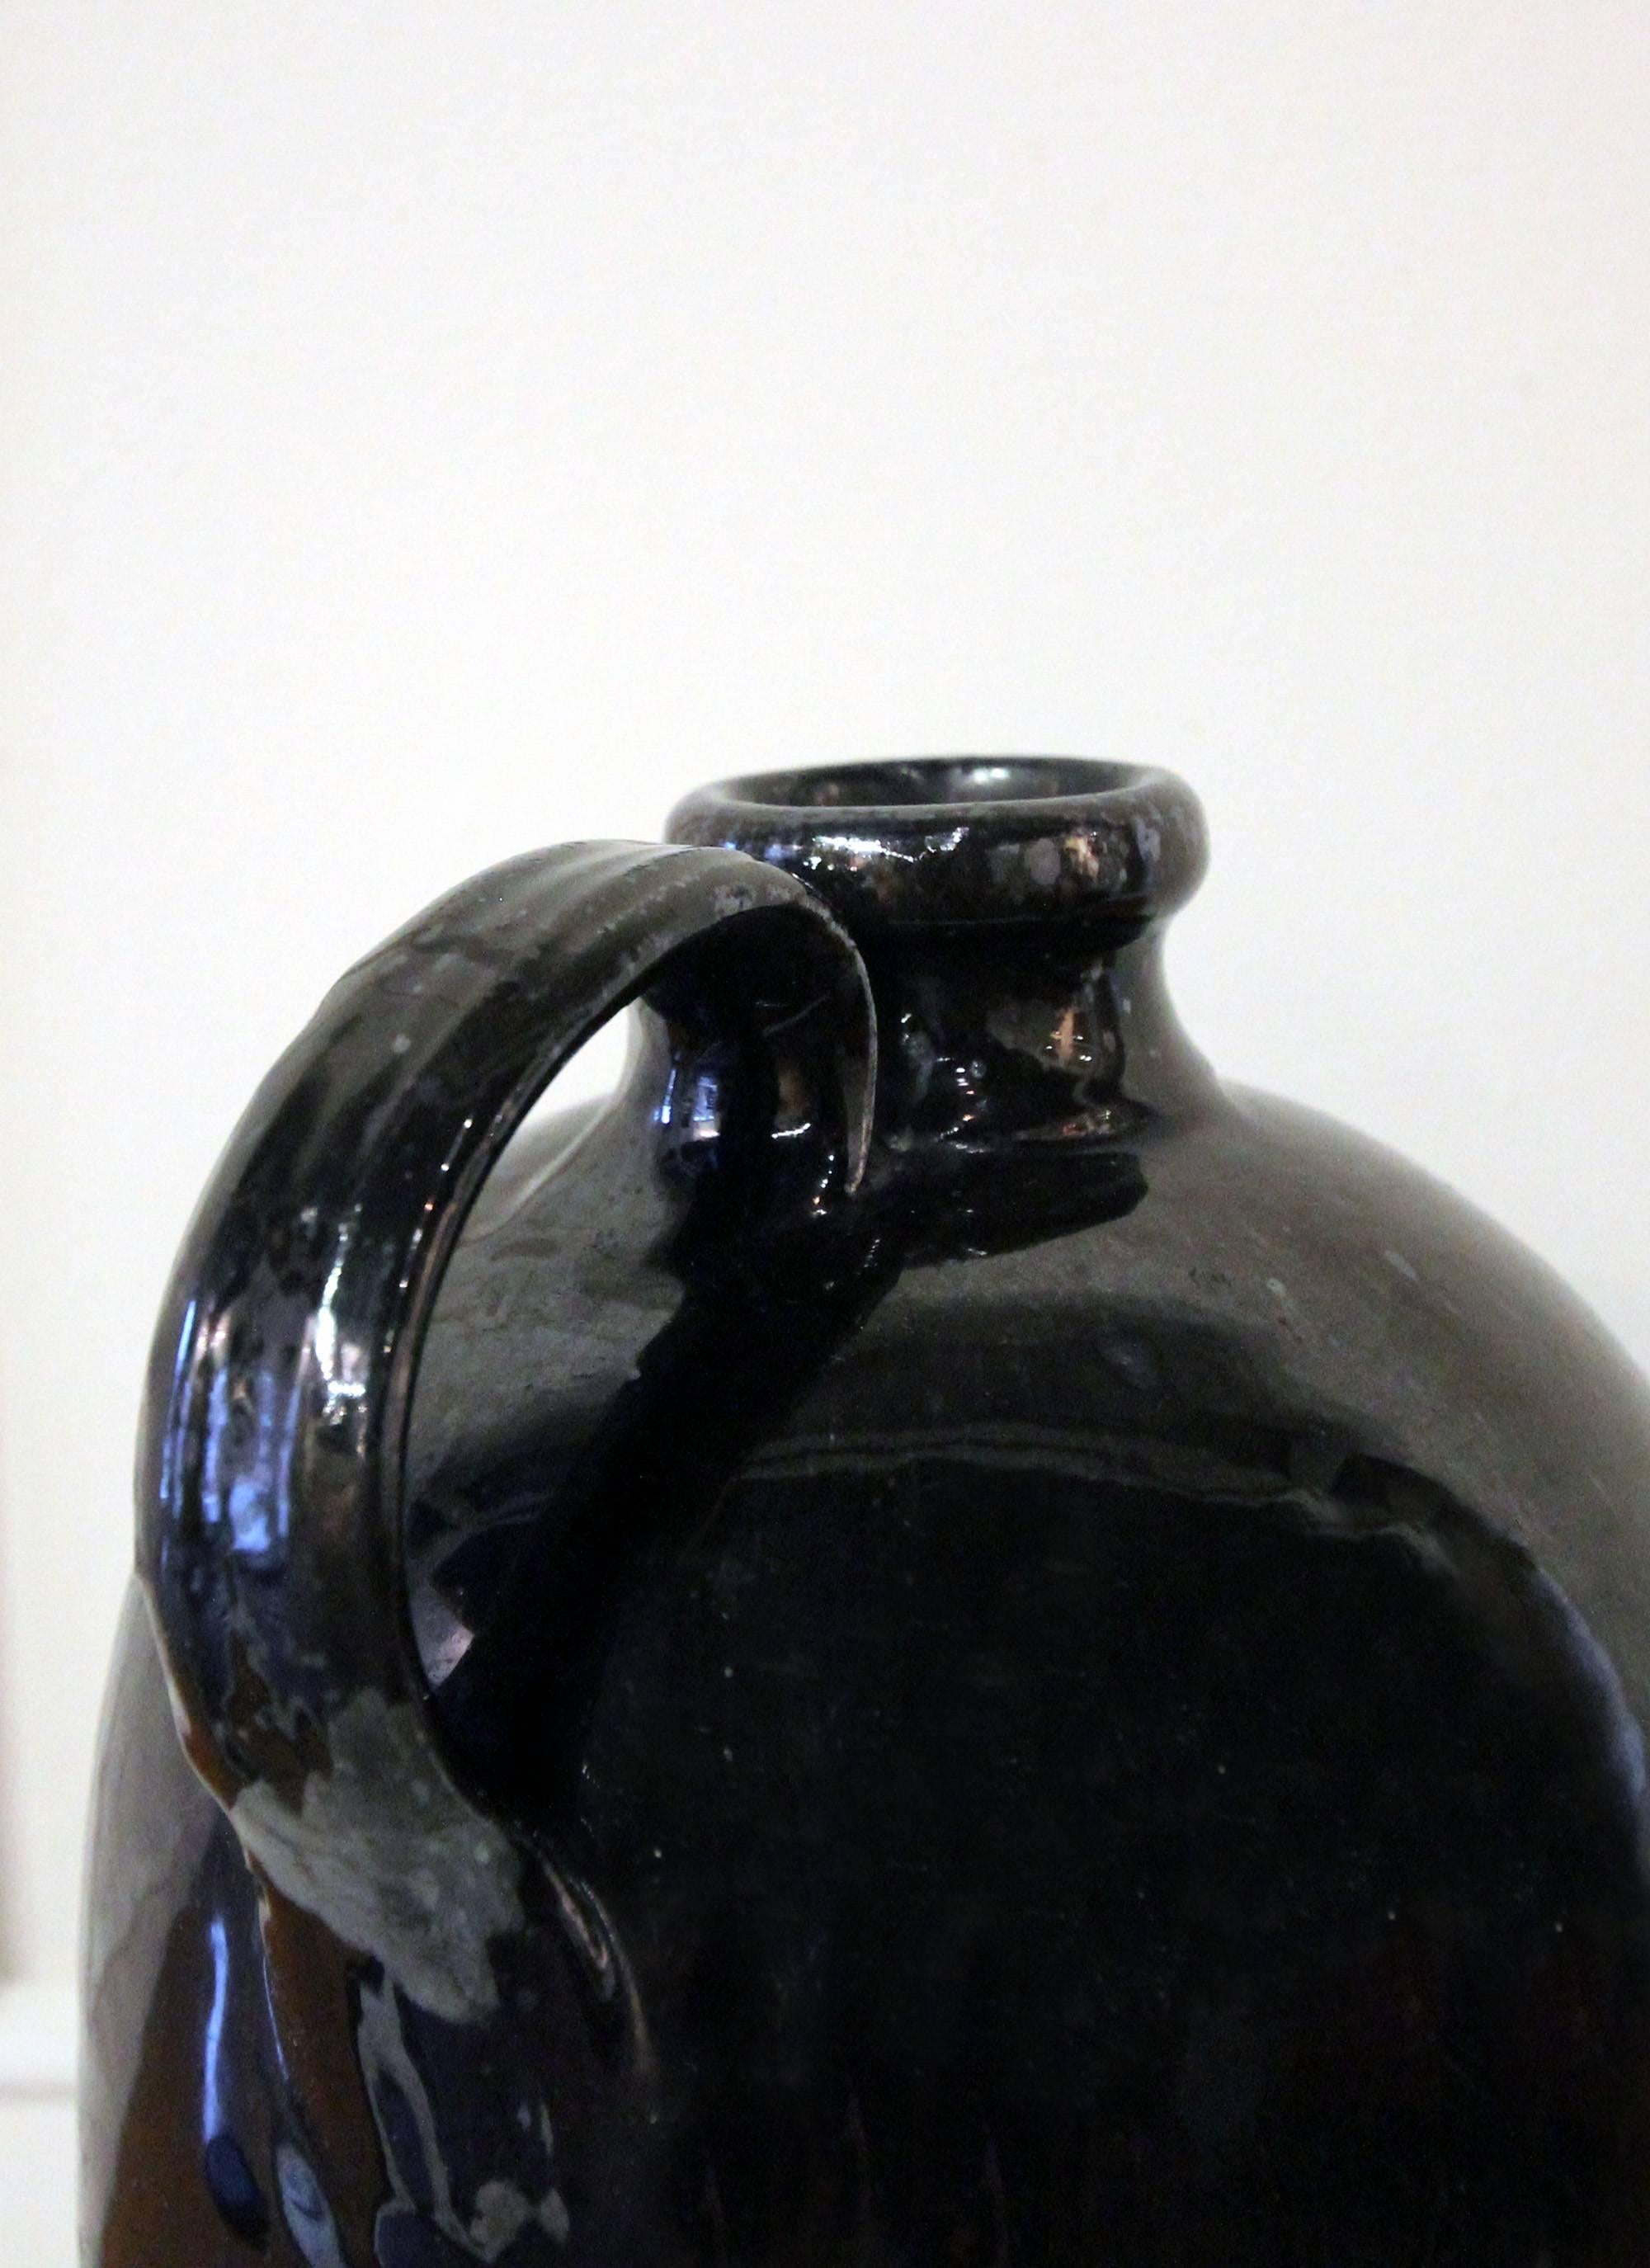 Mid-19th Century American redware jug with a manganese glaze, which is a handsome, slightly metallic black glaze; the underside is glazed as well. Hand-pulled, applied handle and trimmed line detail at the bottom.